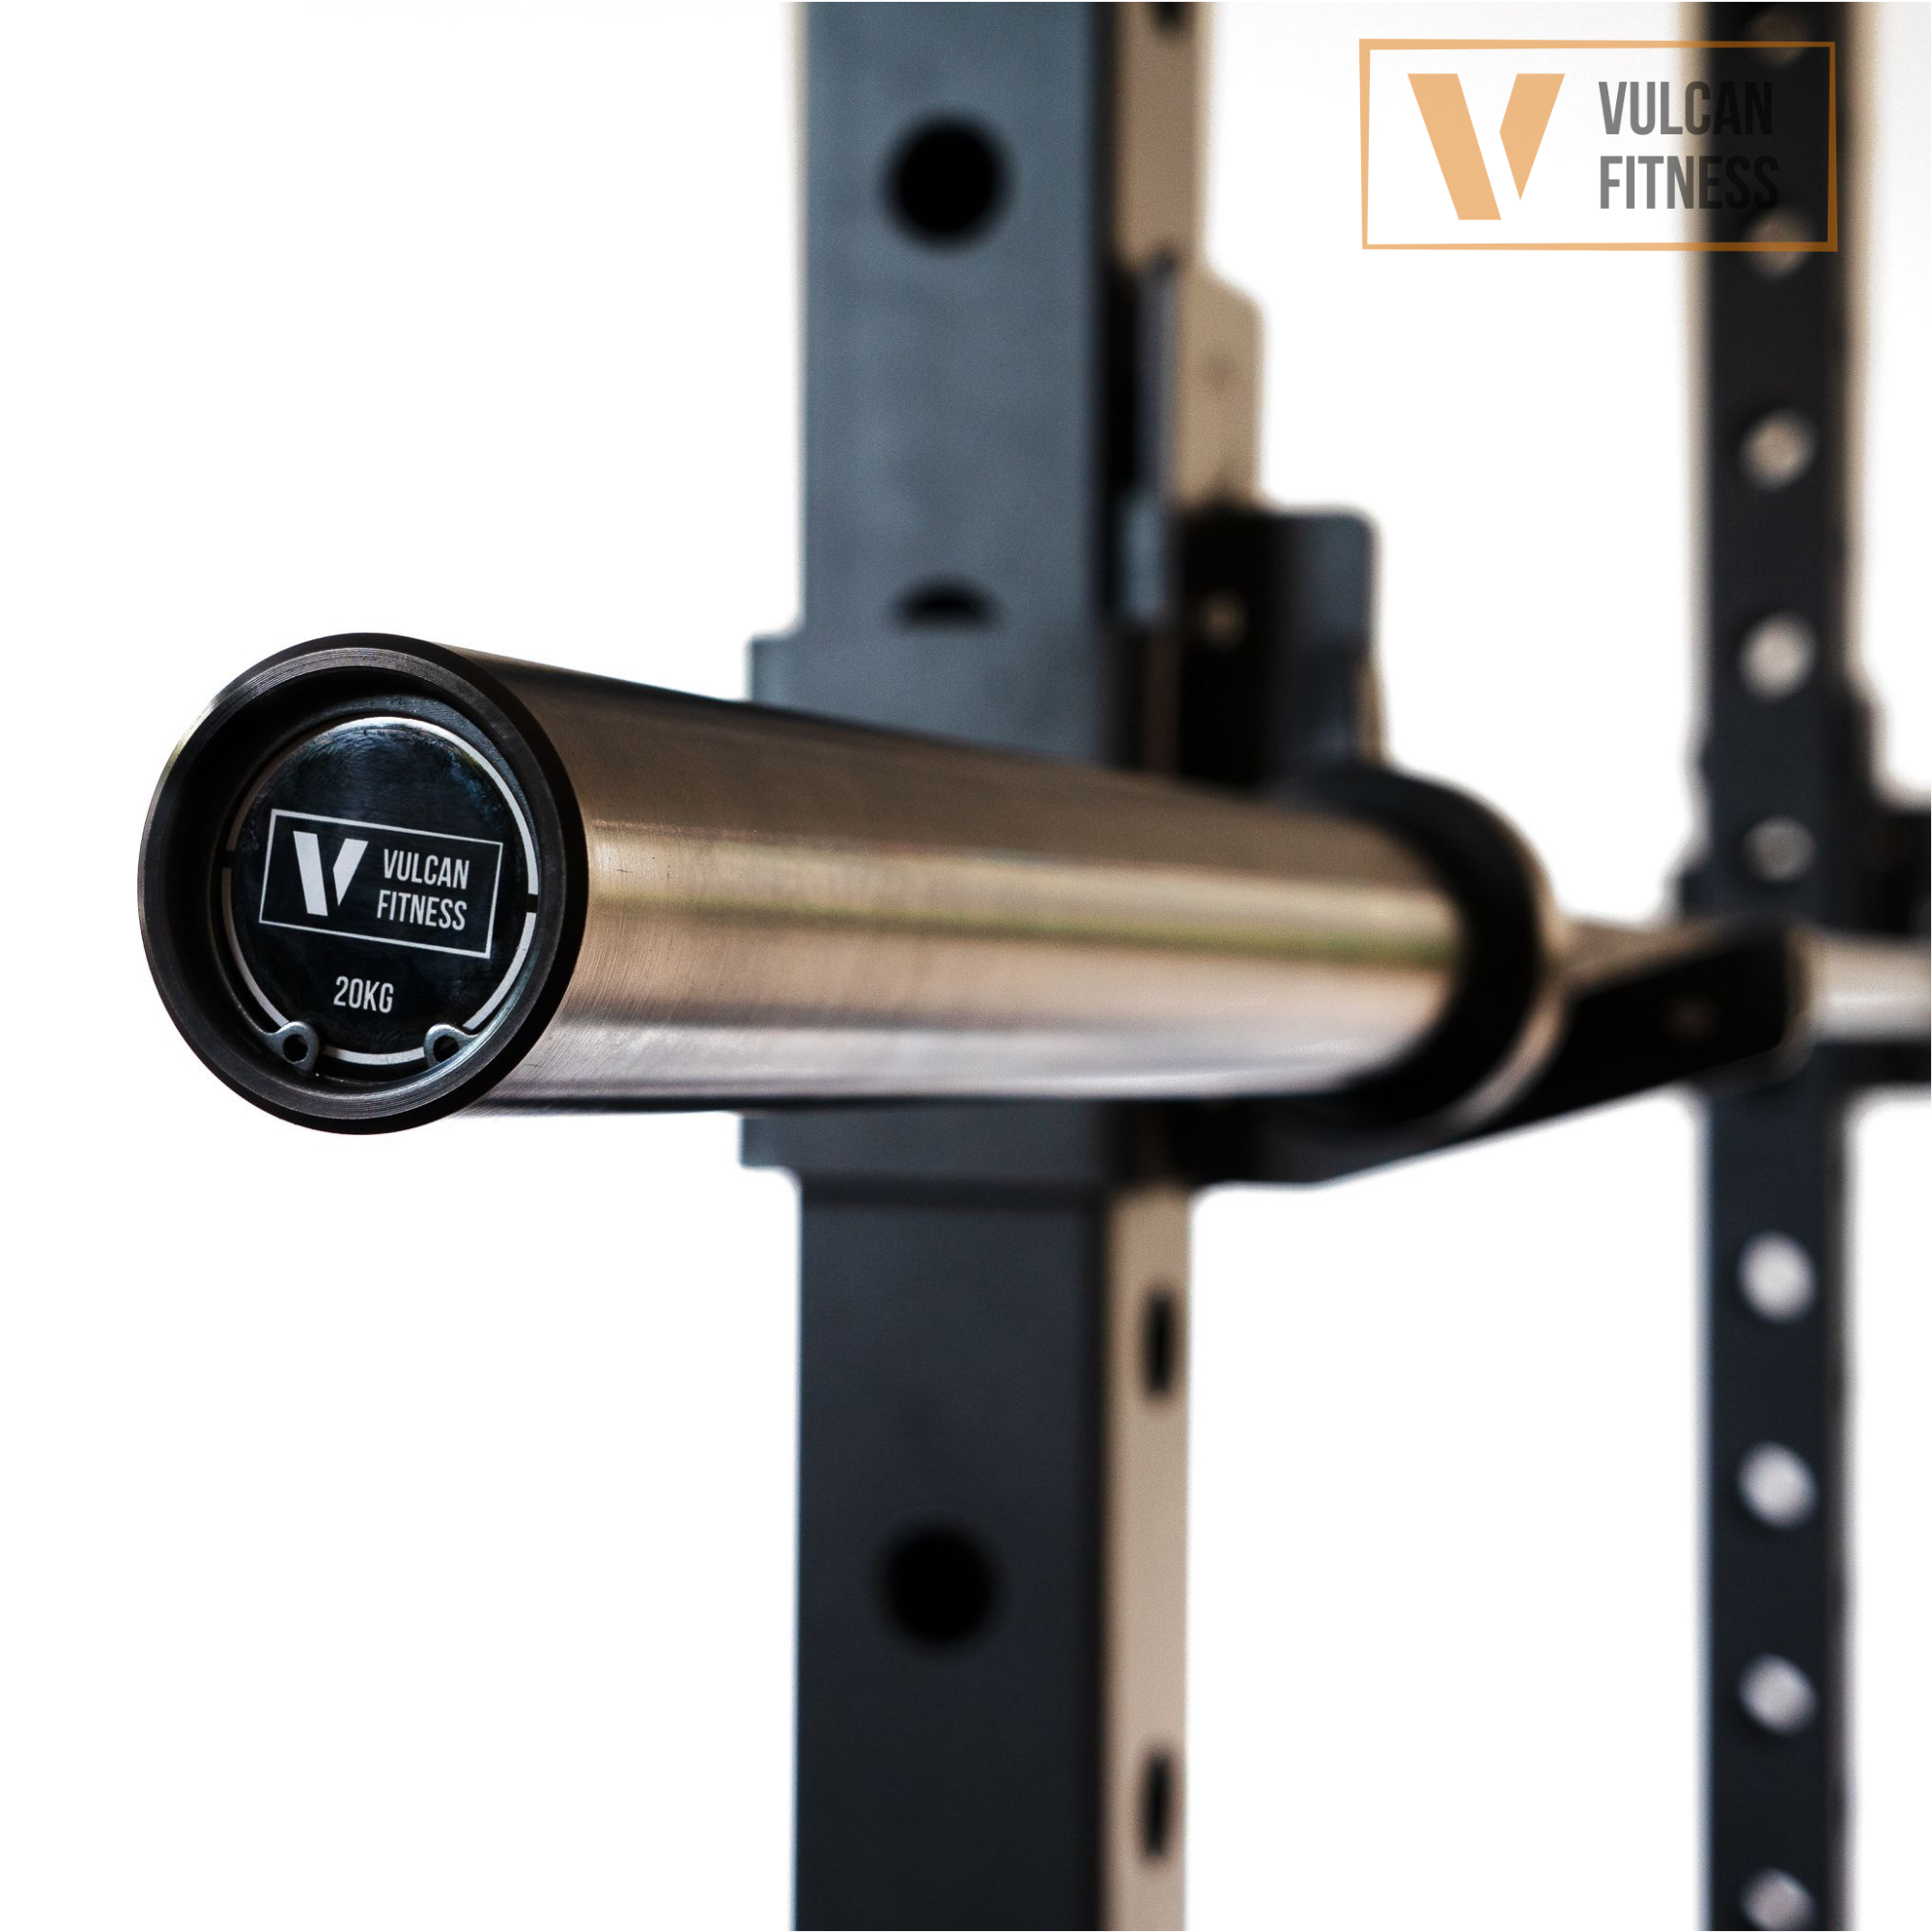 VULCAN Commercial Power Cage, Olympic Barbell, 150kg Colour Bumper Weight Plates & Commercial FID Bench | IN STOCK